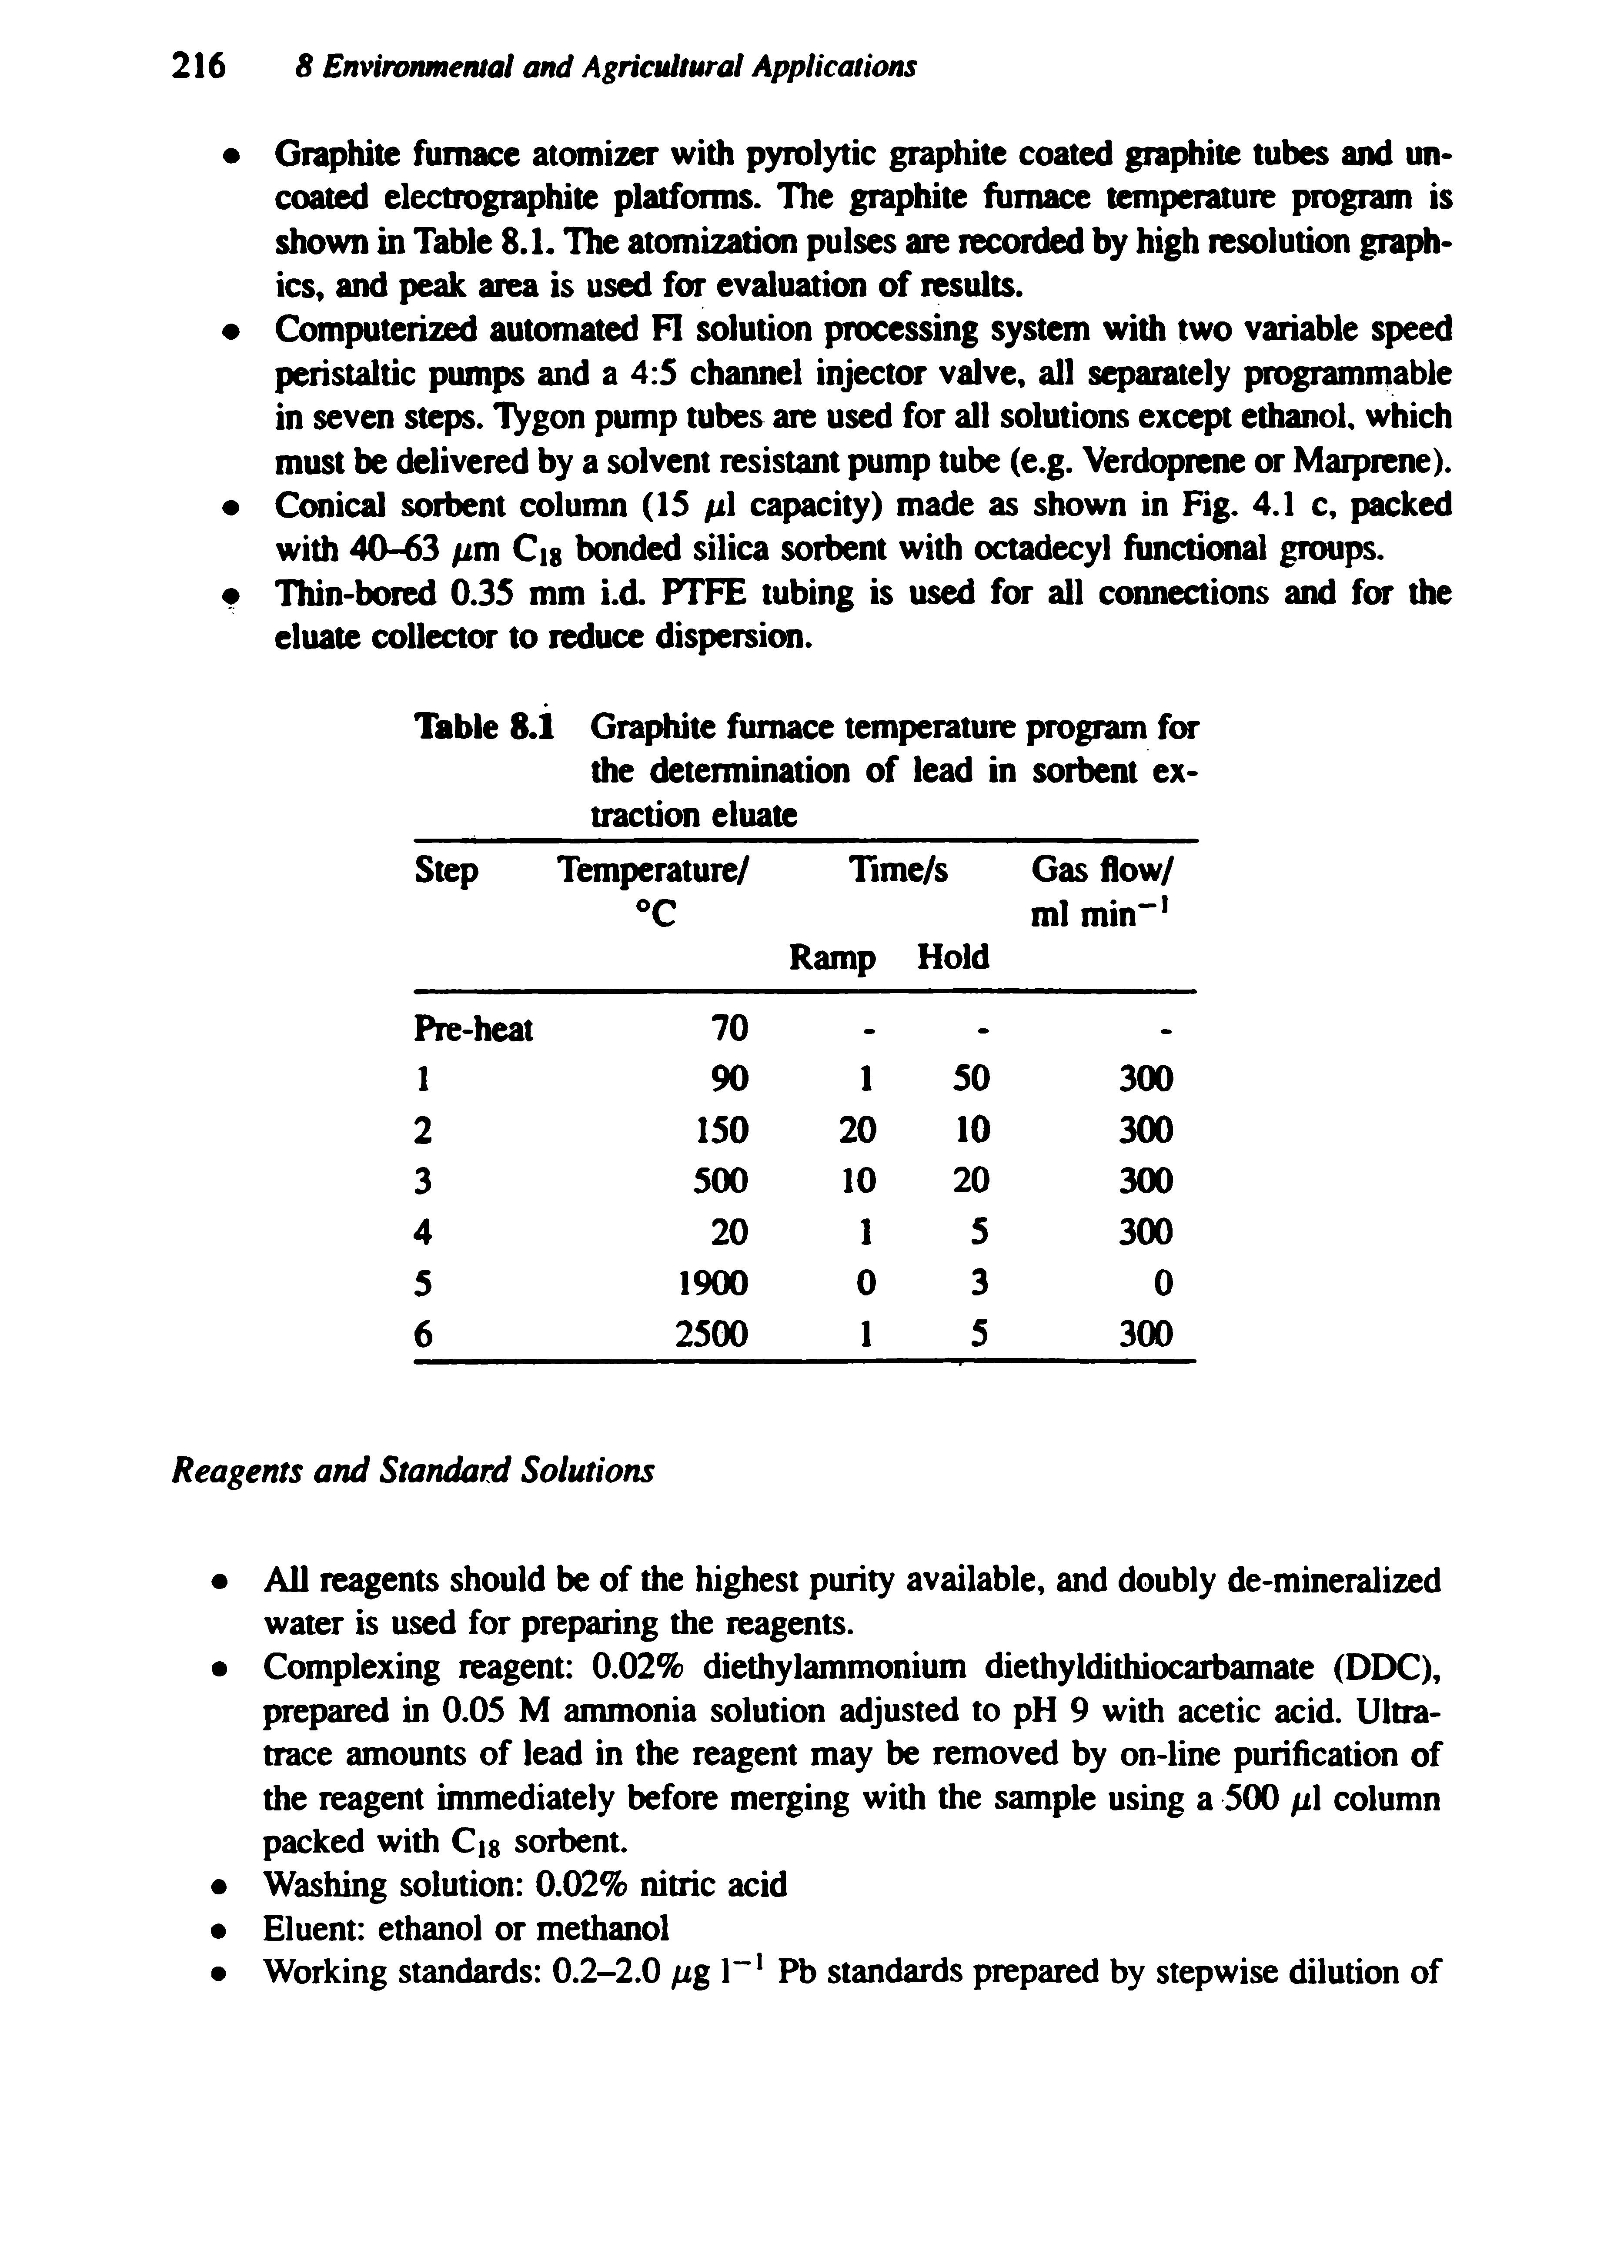 Table 8.1 Graphite furnace temperature program for the determination of lead in sorbent extraction eluate...